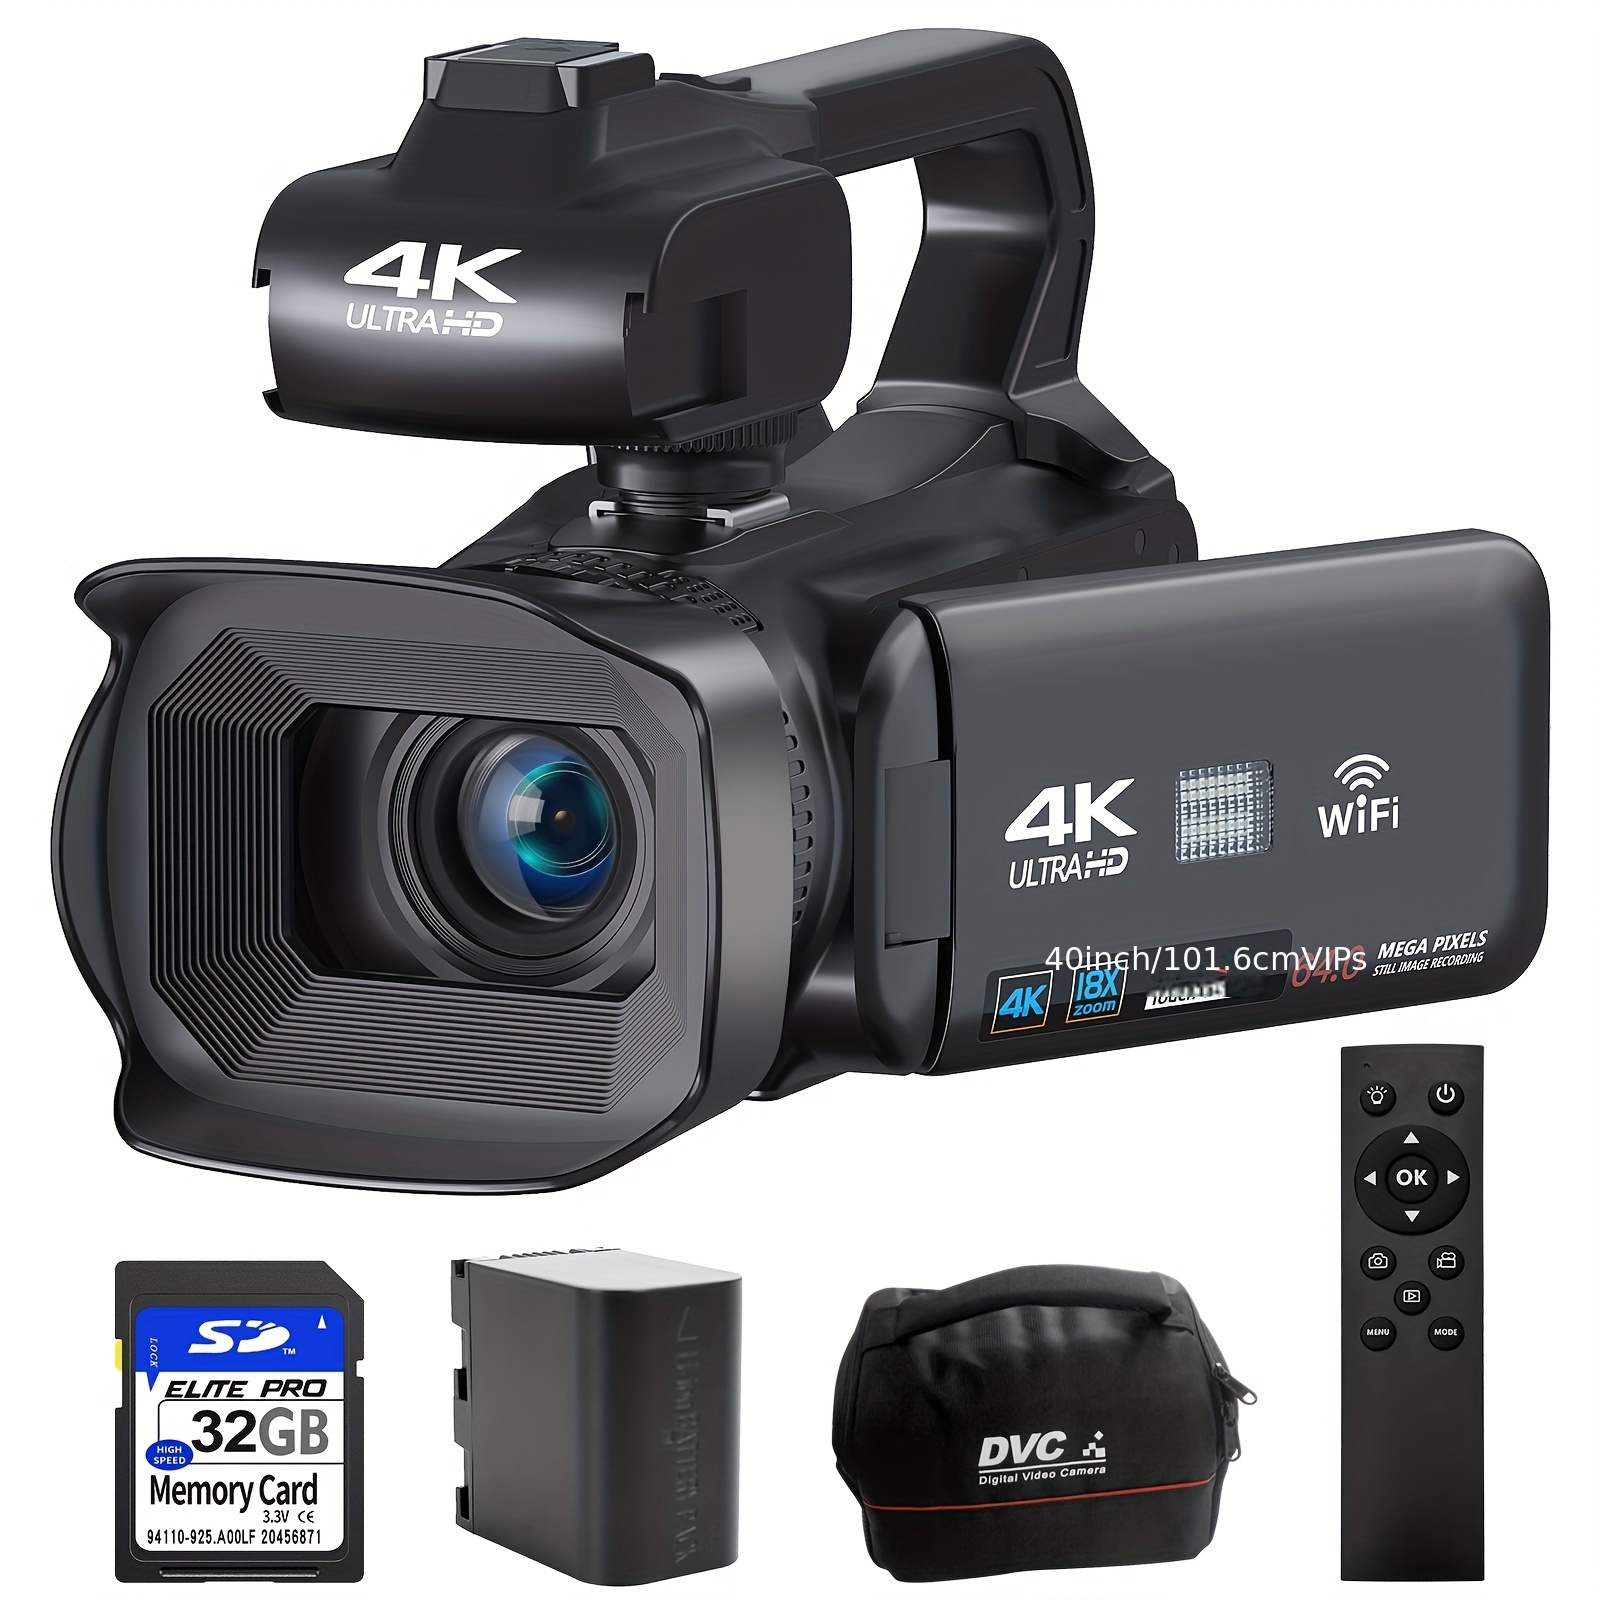 Questions and Answers about Camcorders and Video Cameras